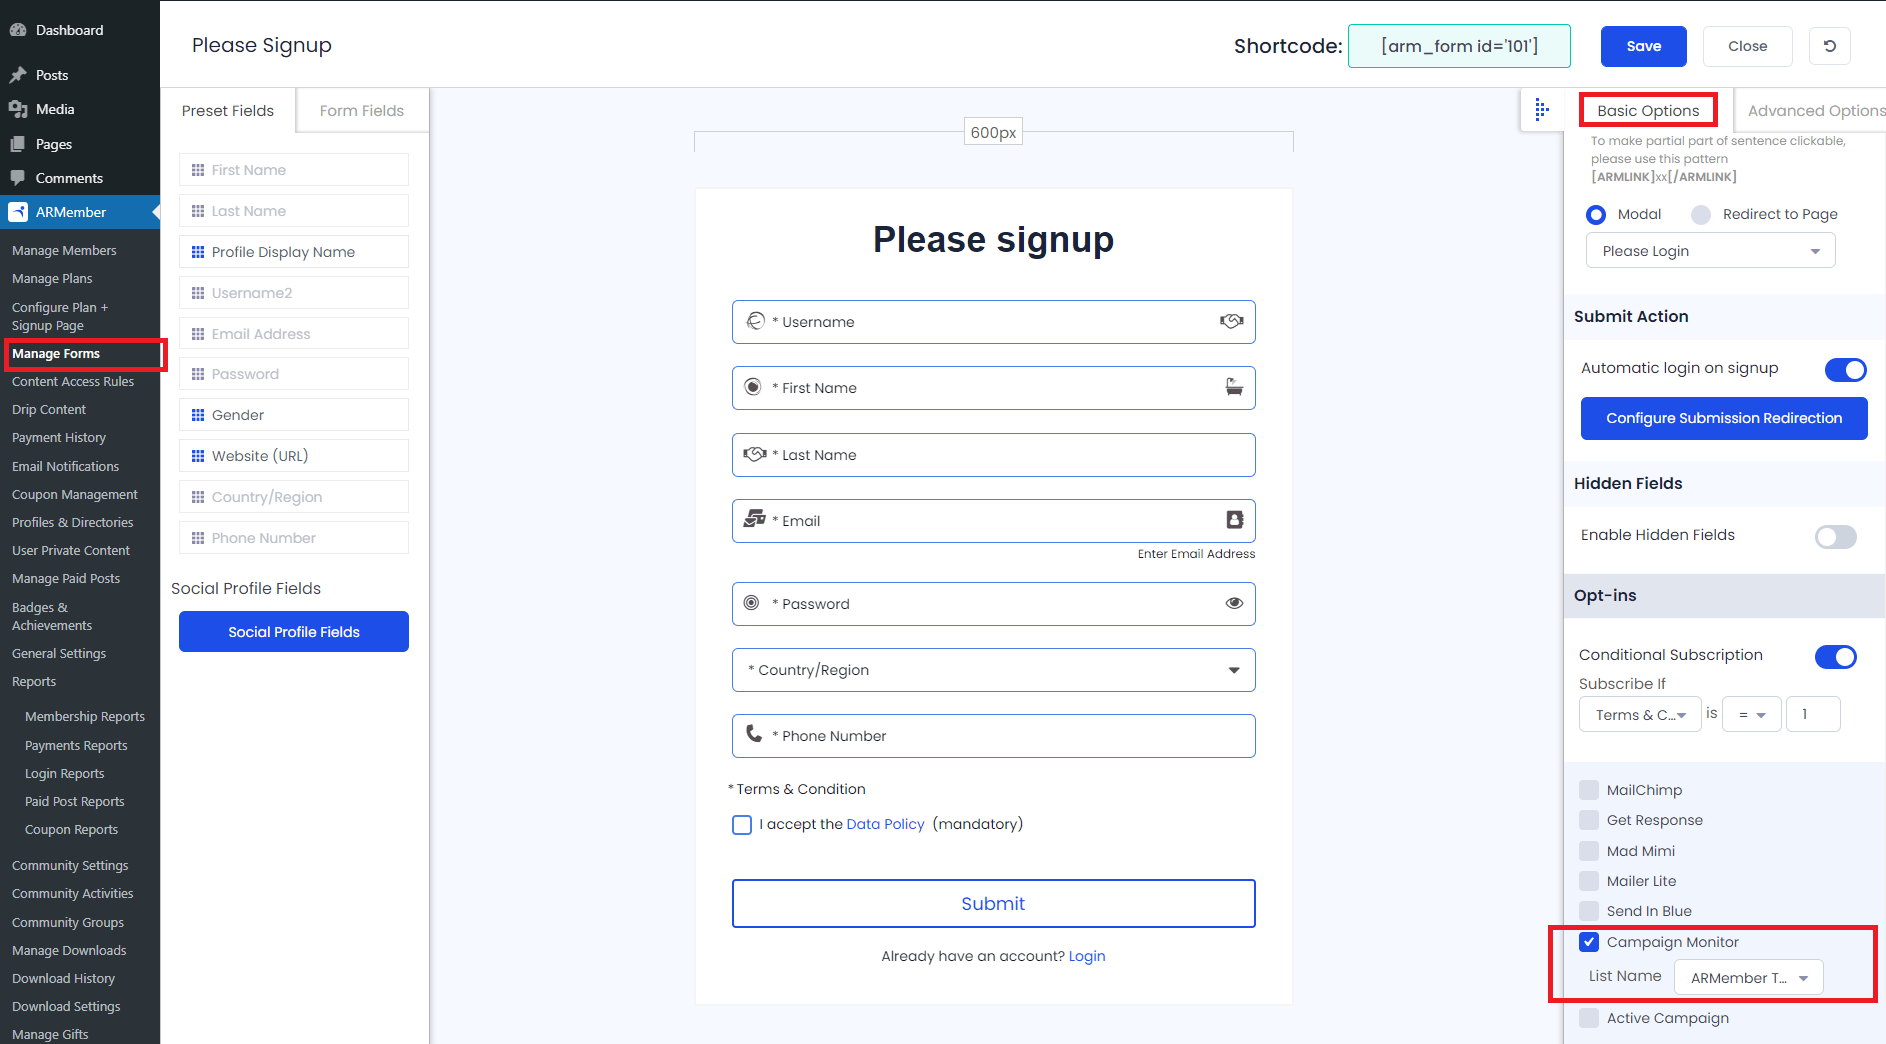 ARMember Campaign Monitor Signup Form Settings